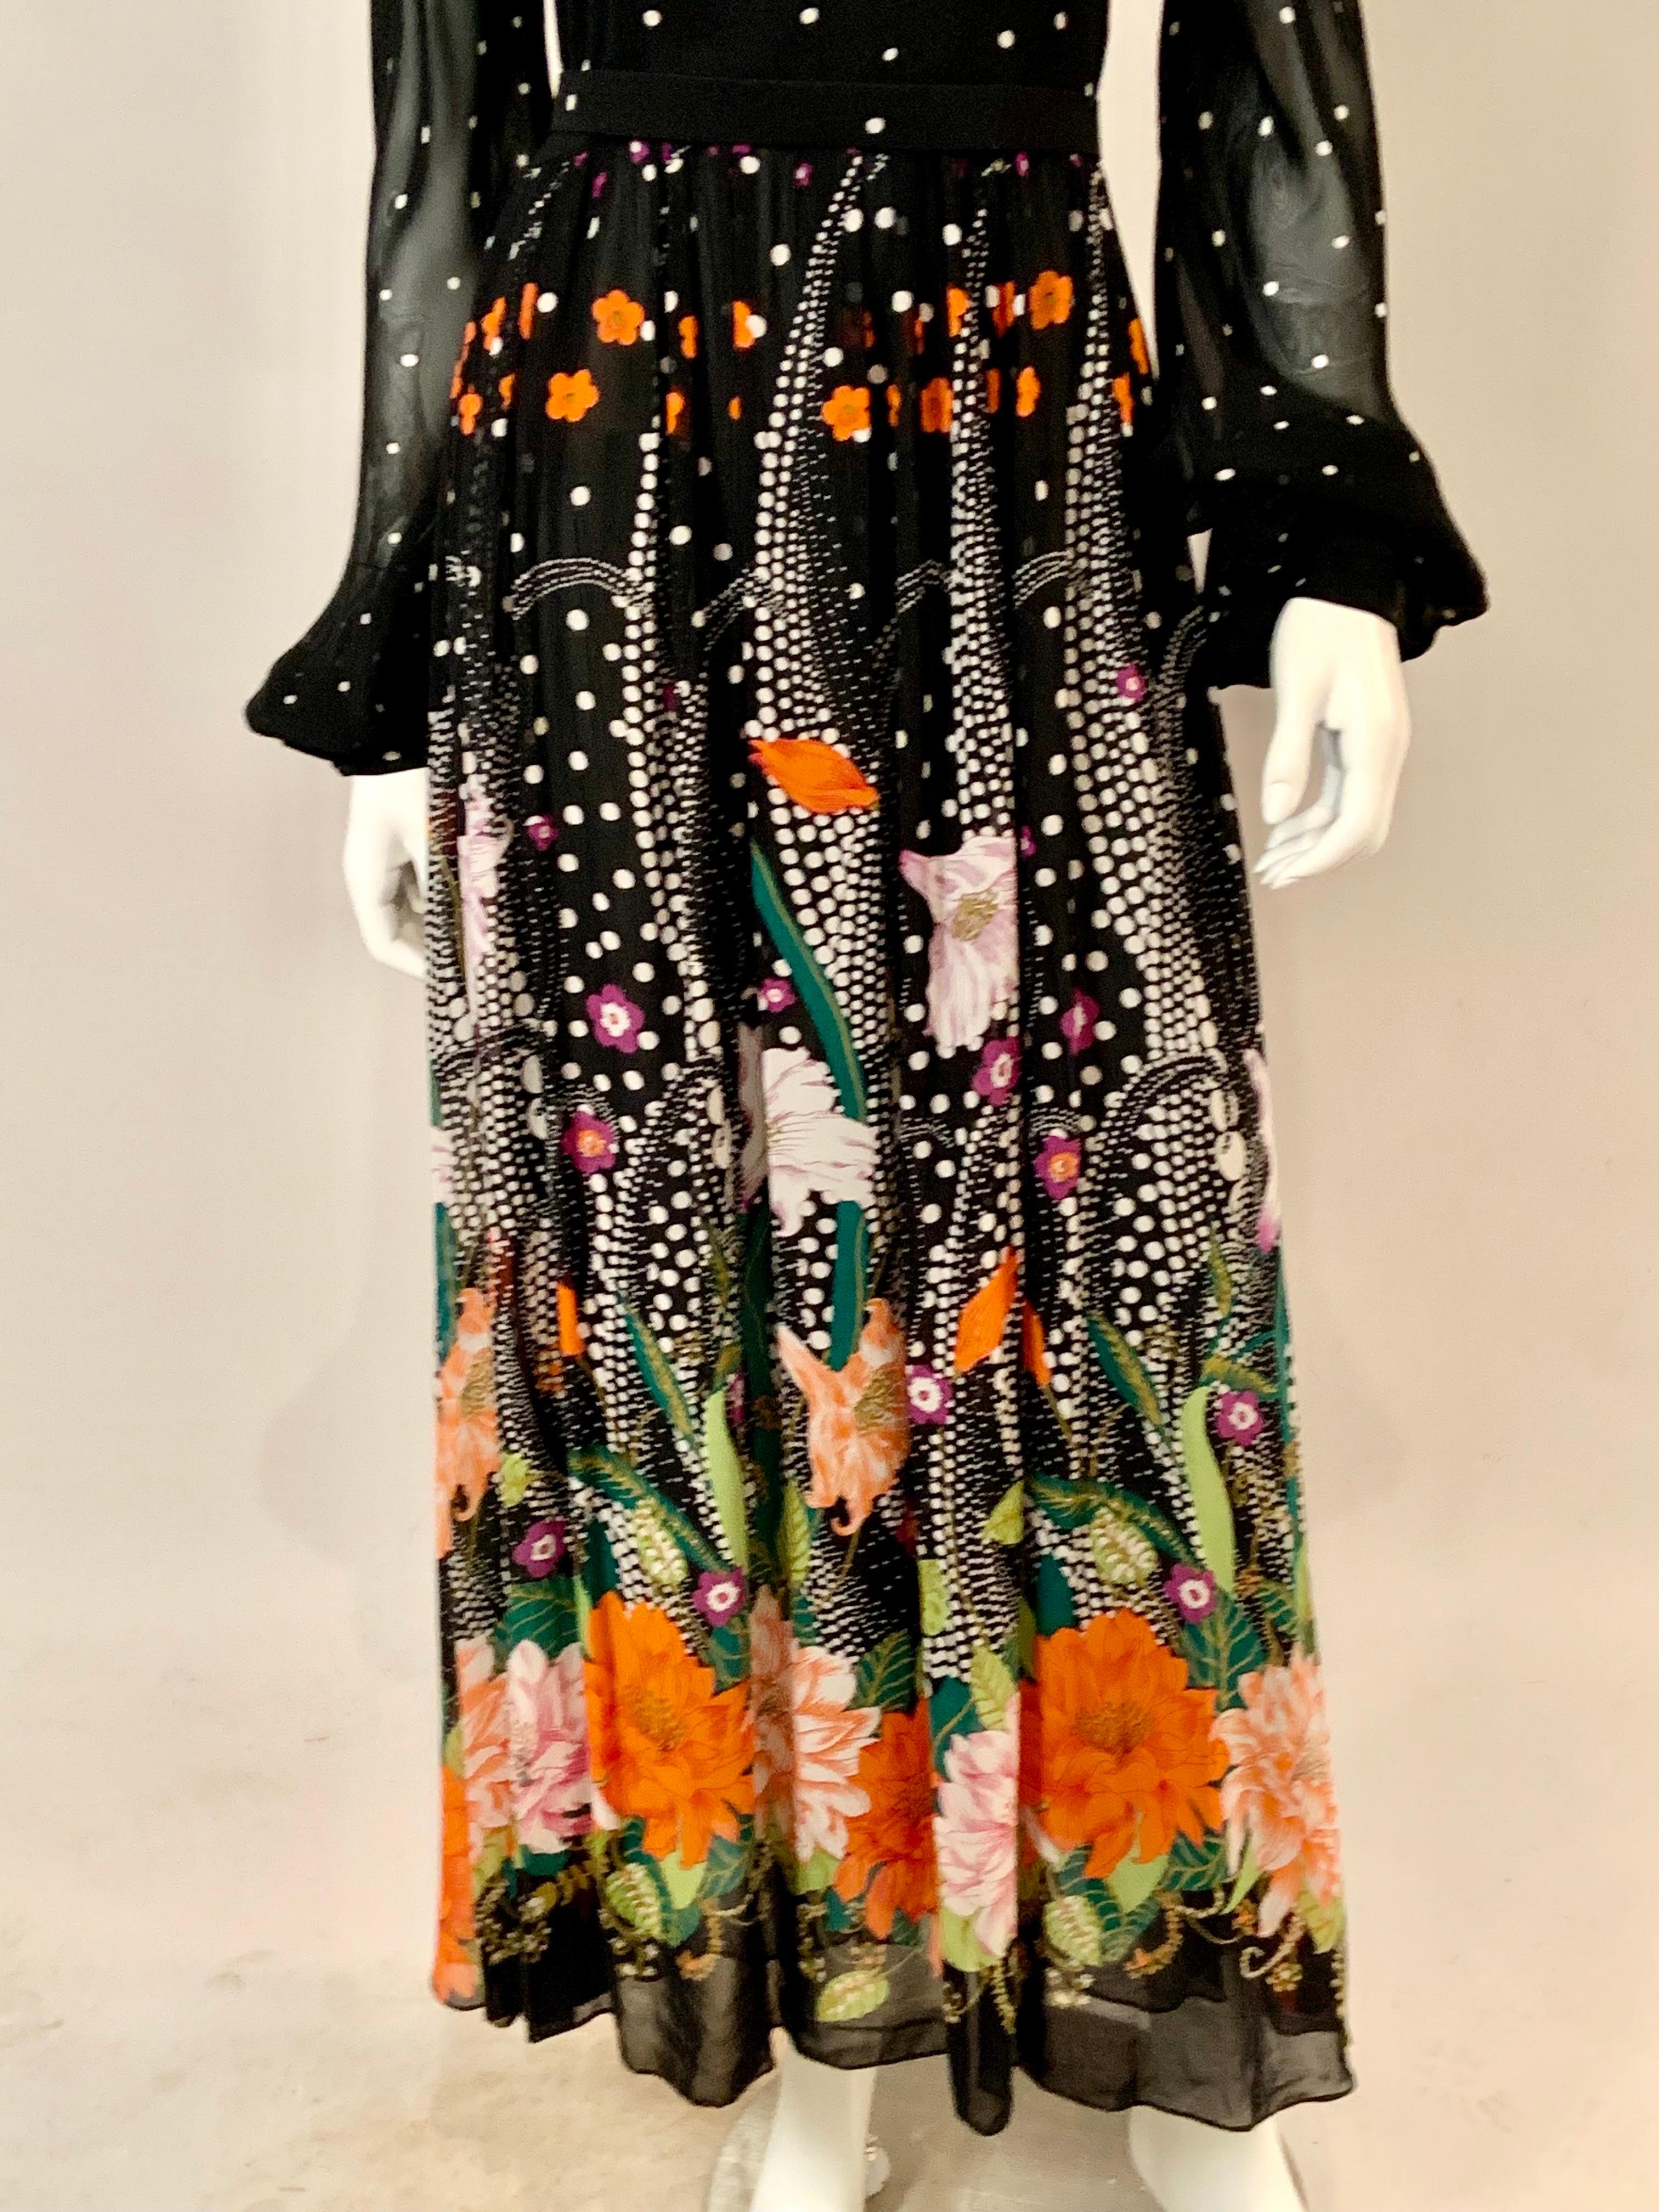 Women's 1970's Chiffon Maxi Dress with a Polka Dot and Flower Print For Sale